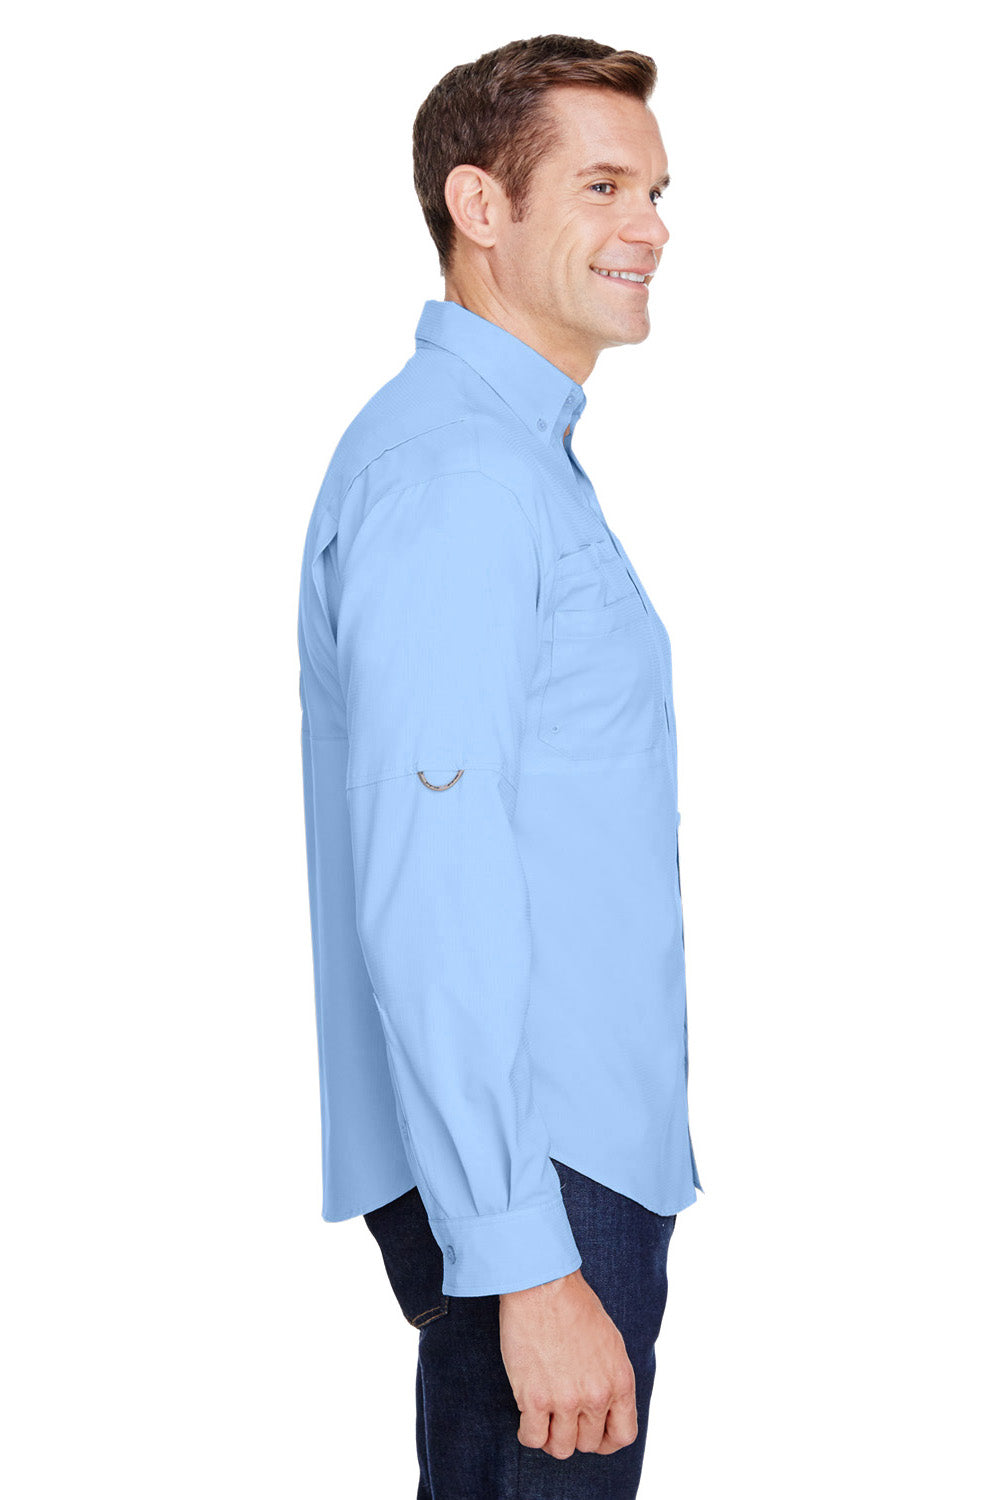 Columbia 7253 Mens Tamiami II Moisture Wicking Long Sleeve Button Down Shirt w/ Double Pockets Sail Blue Side